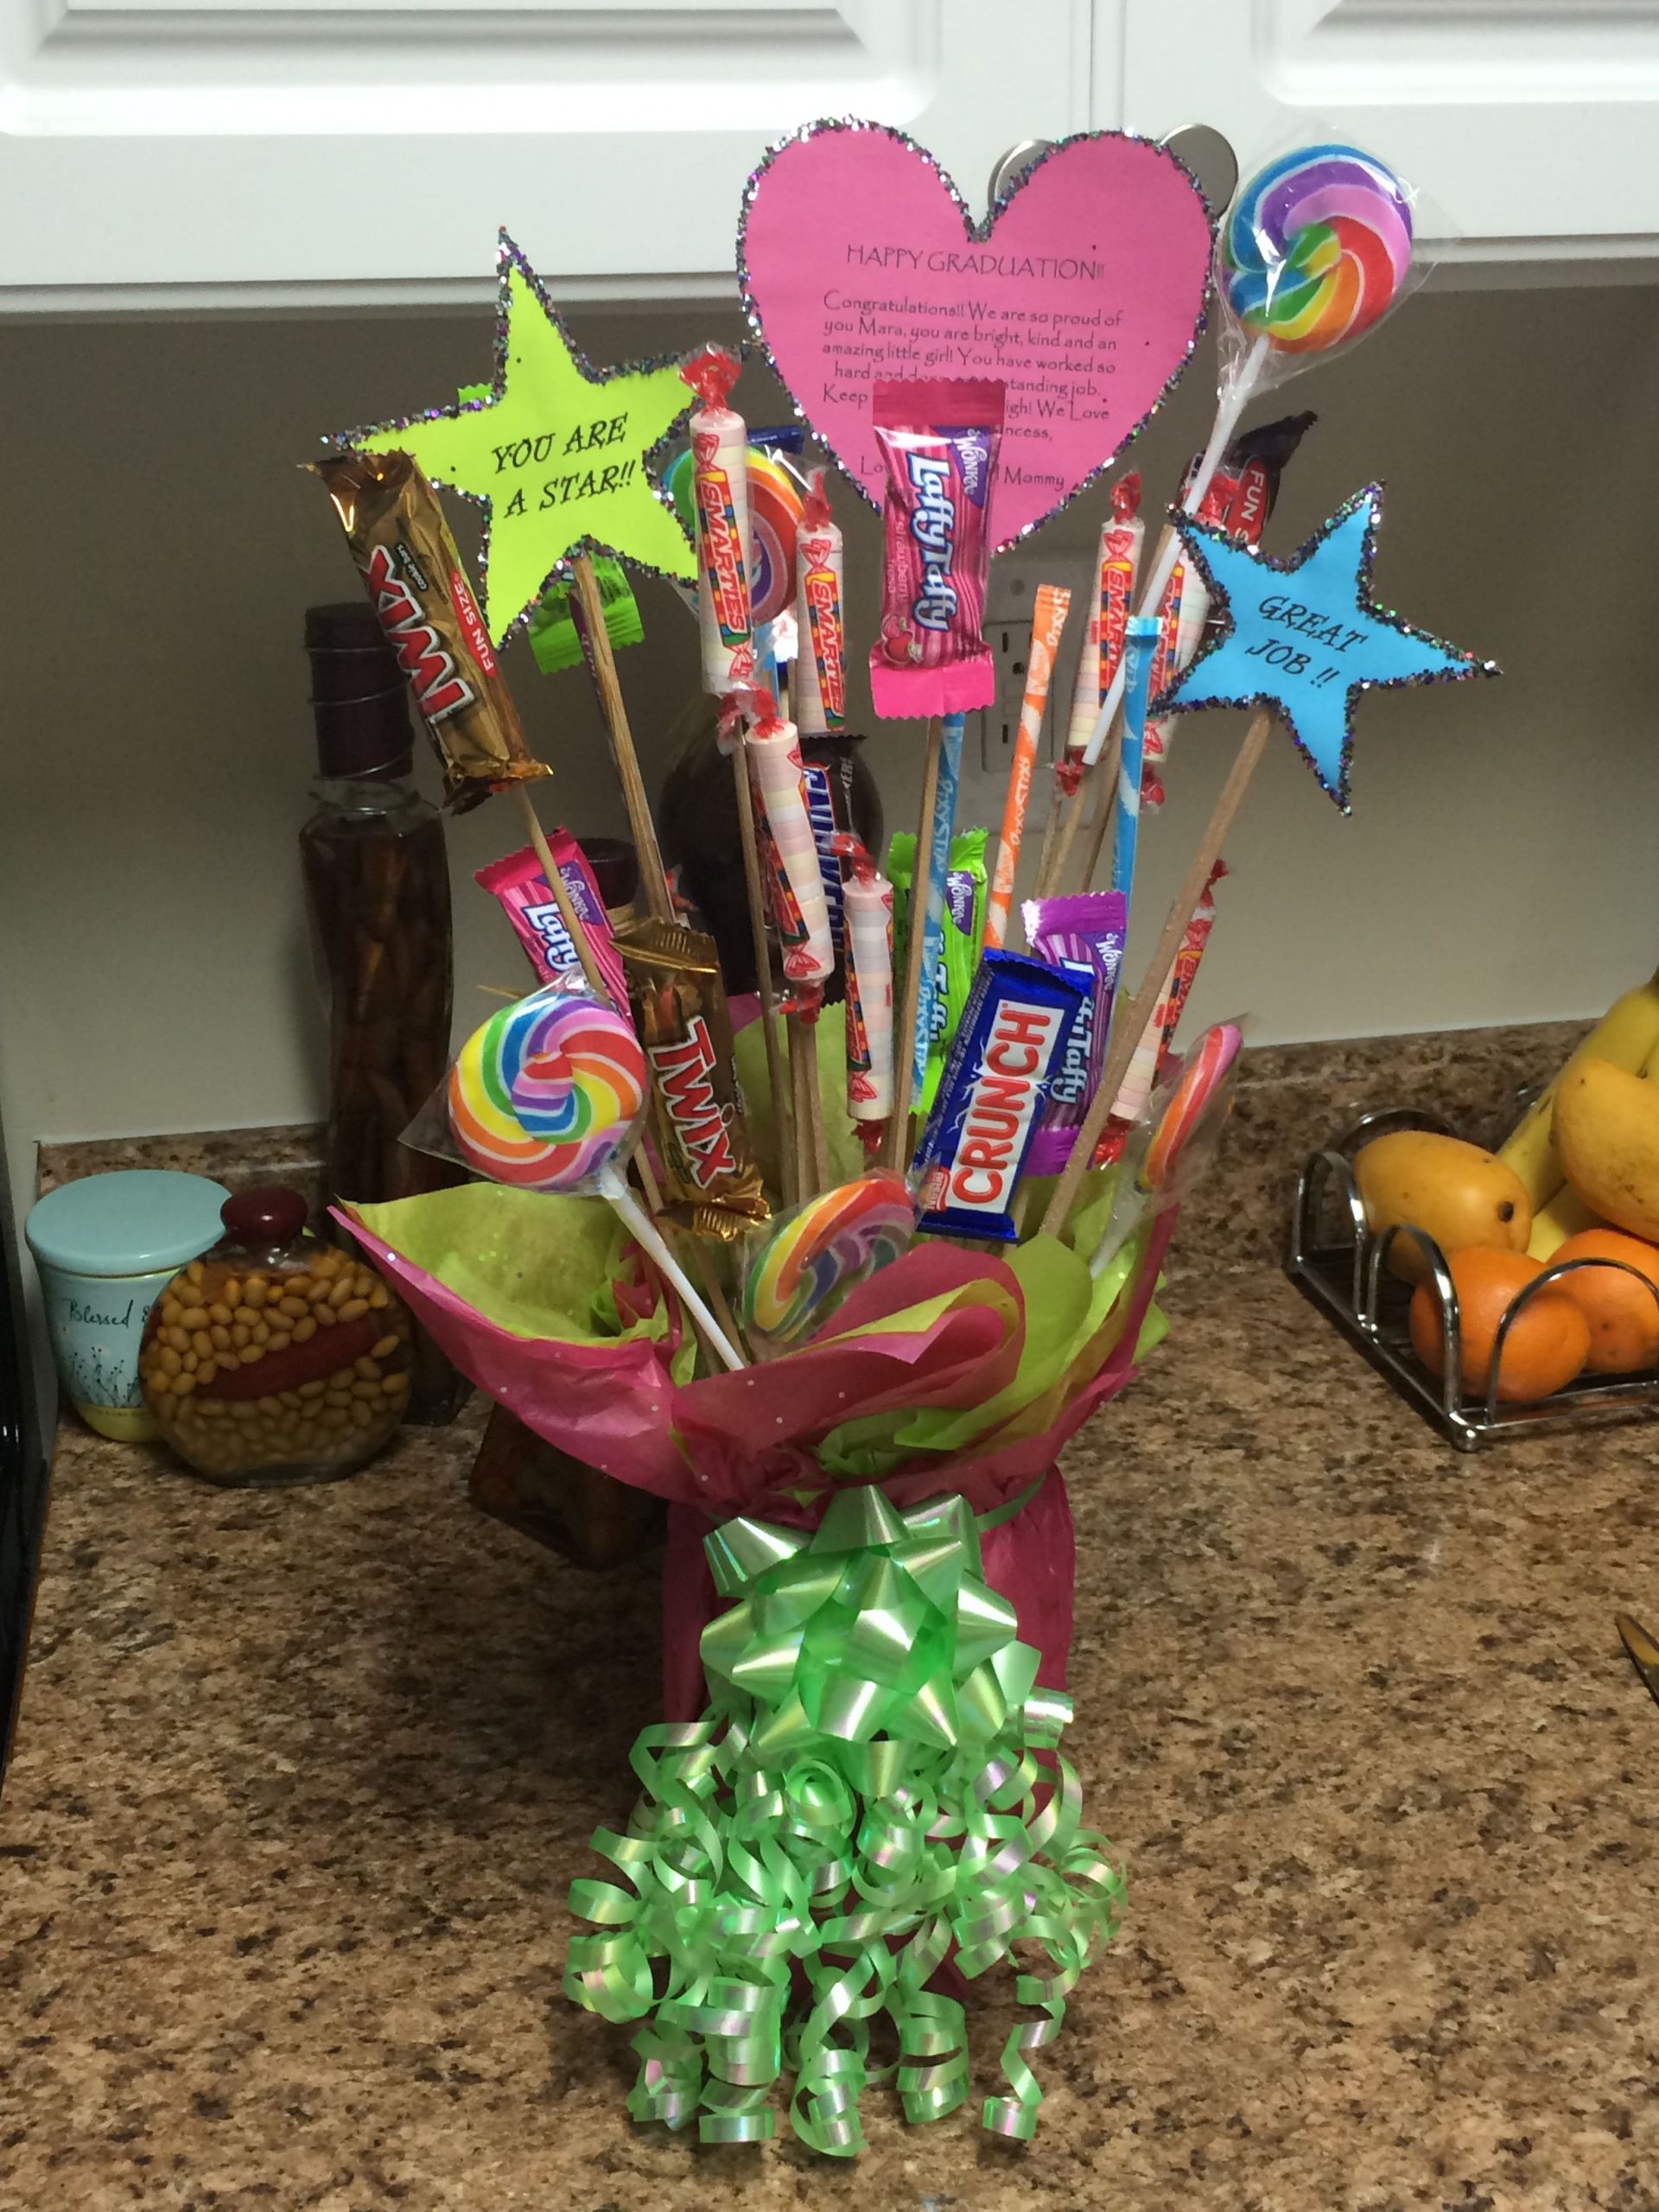 Elementary School Graduation Gift Ideas
 This is a t bouquet I made for my daughter s 5th grade